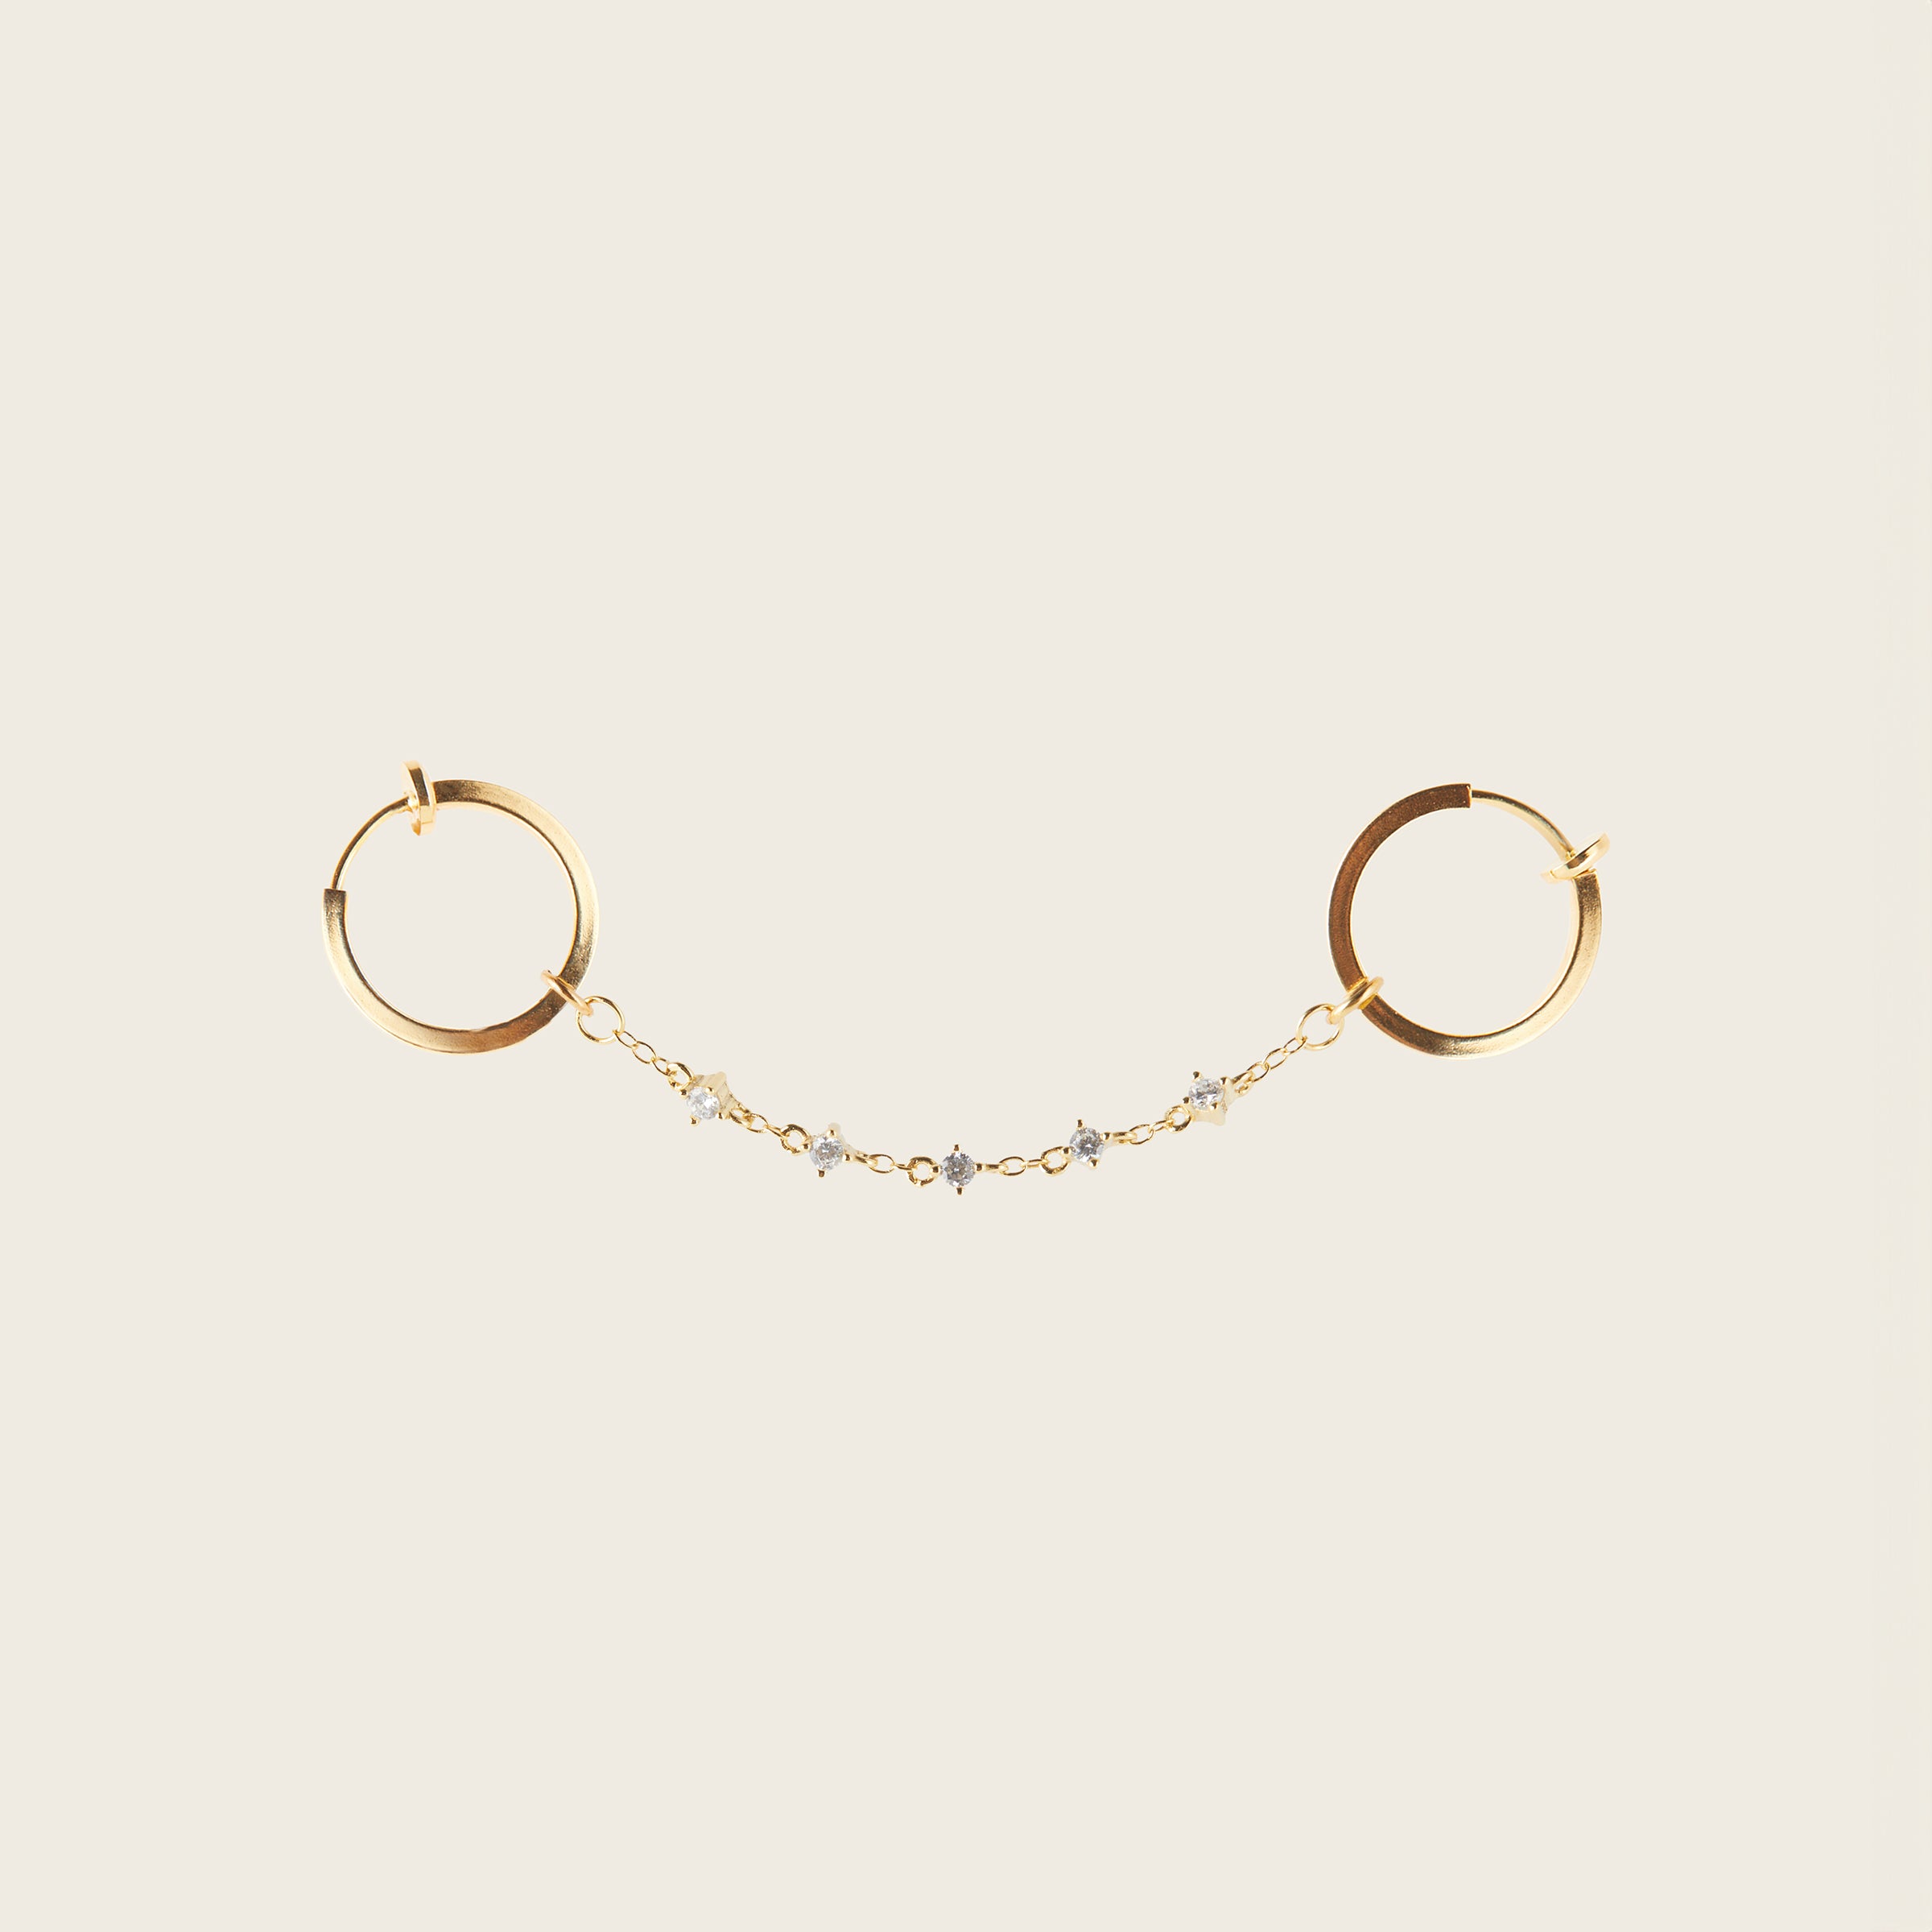 Image of the Single Cluster Hoop Chain are made with high-quality materials, including 18K gold plating over 925 Sterling Silver. These charms are both non-tarnish and water resistant. The perfect combination of style and durability.